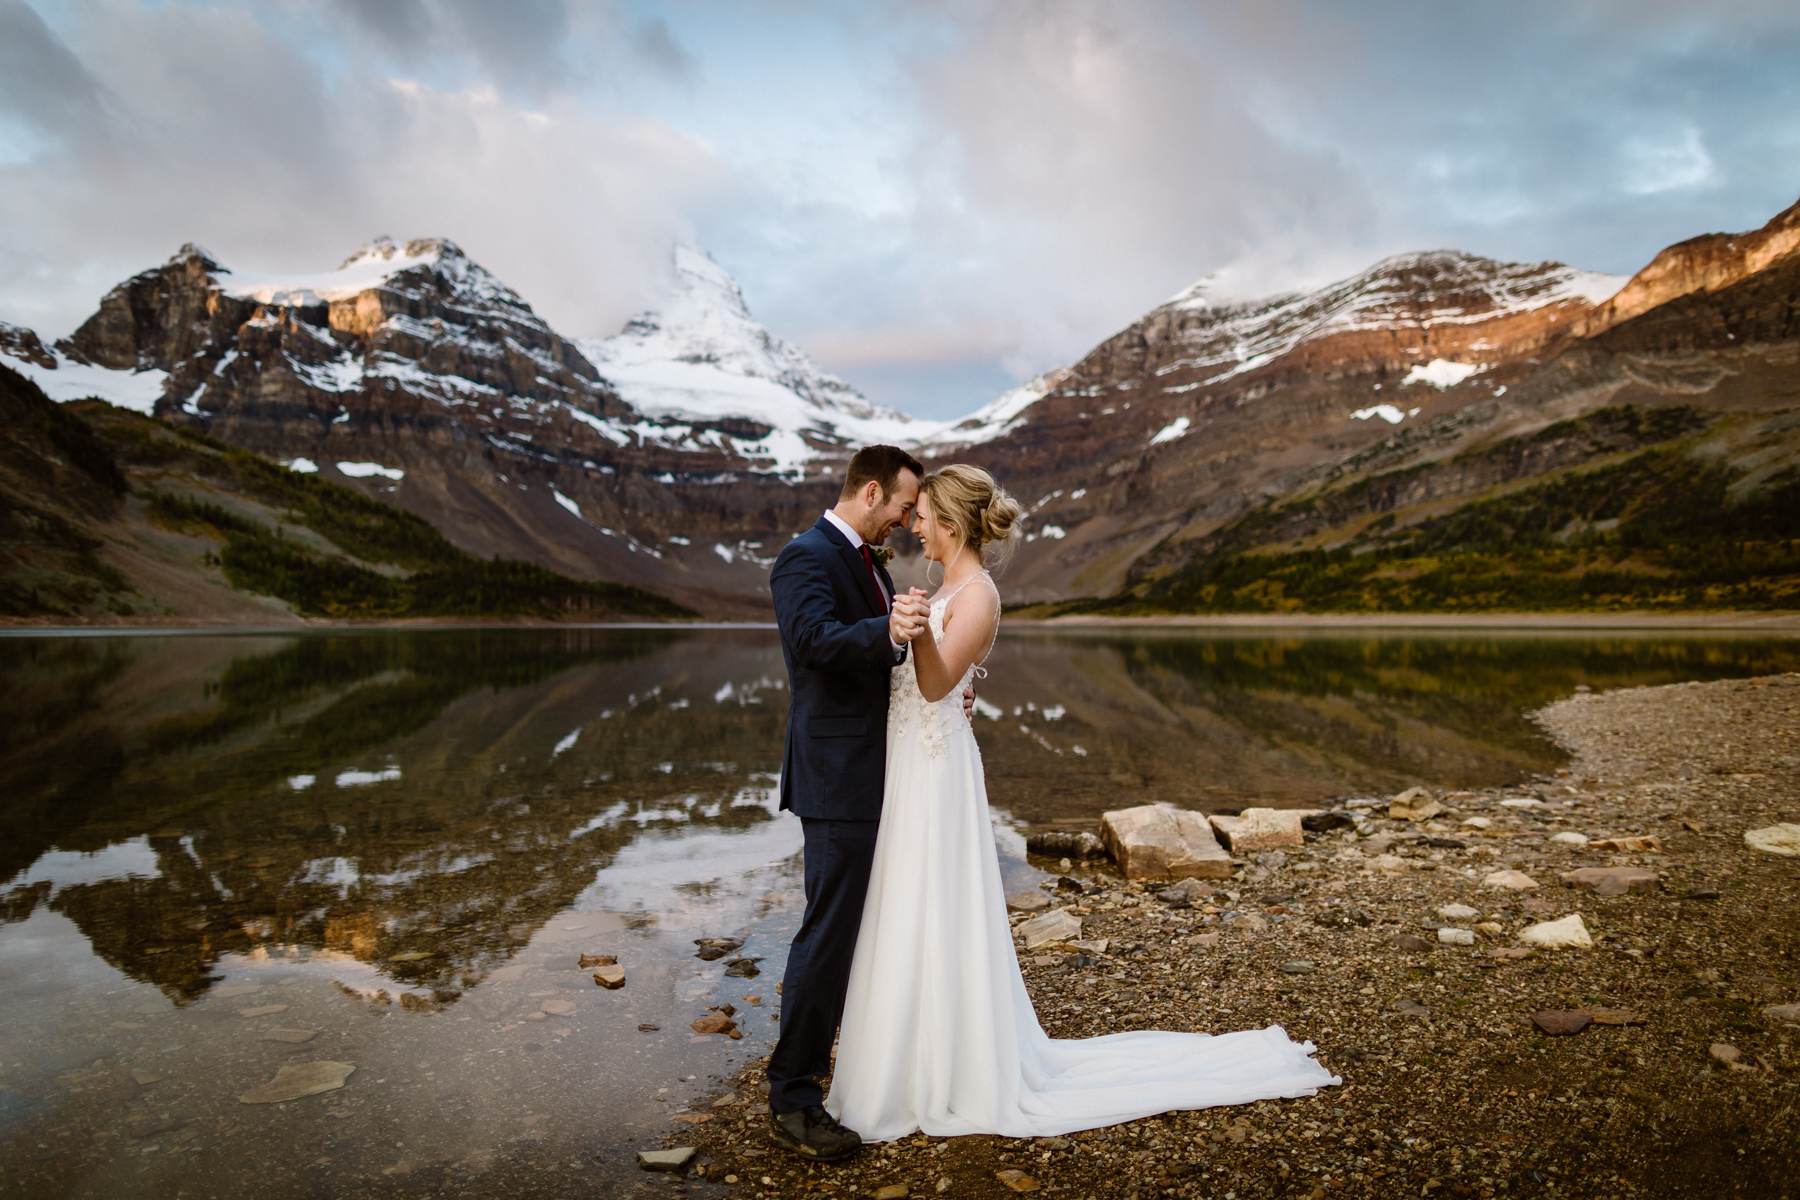 Mount Assiniboine Elopement Photographers at a Backcountry Lodge - Photo 52